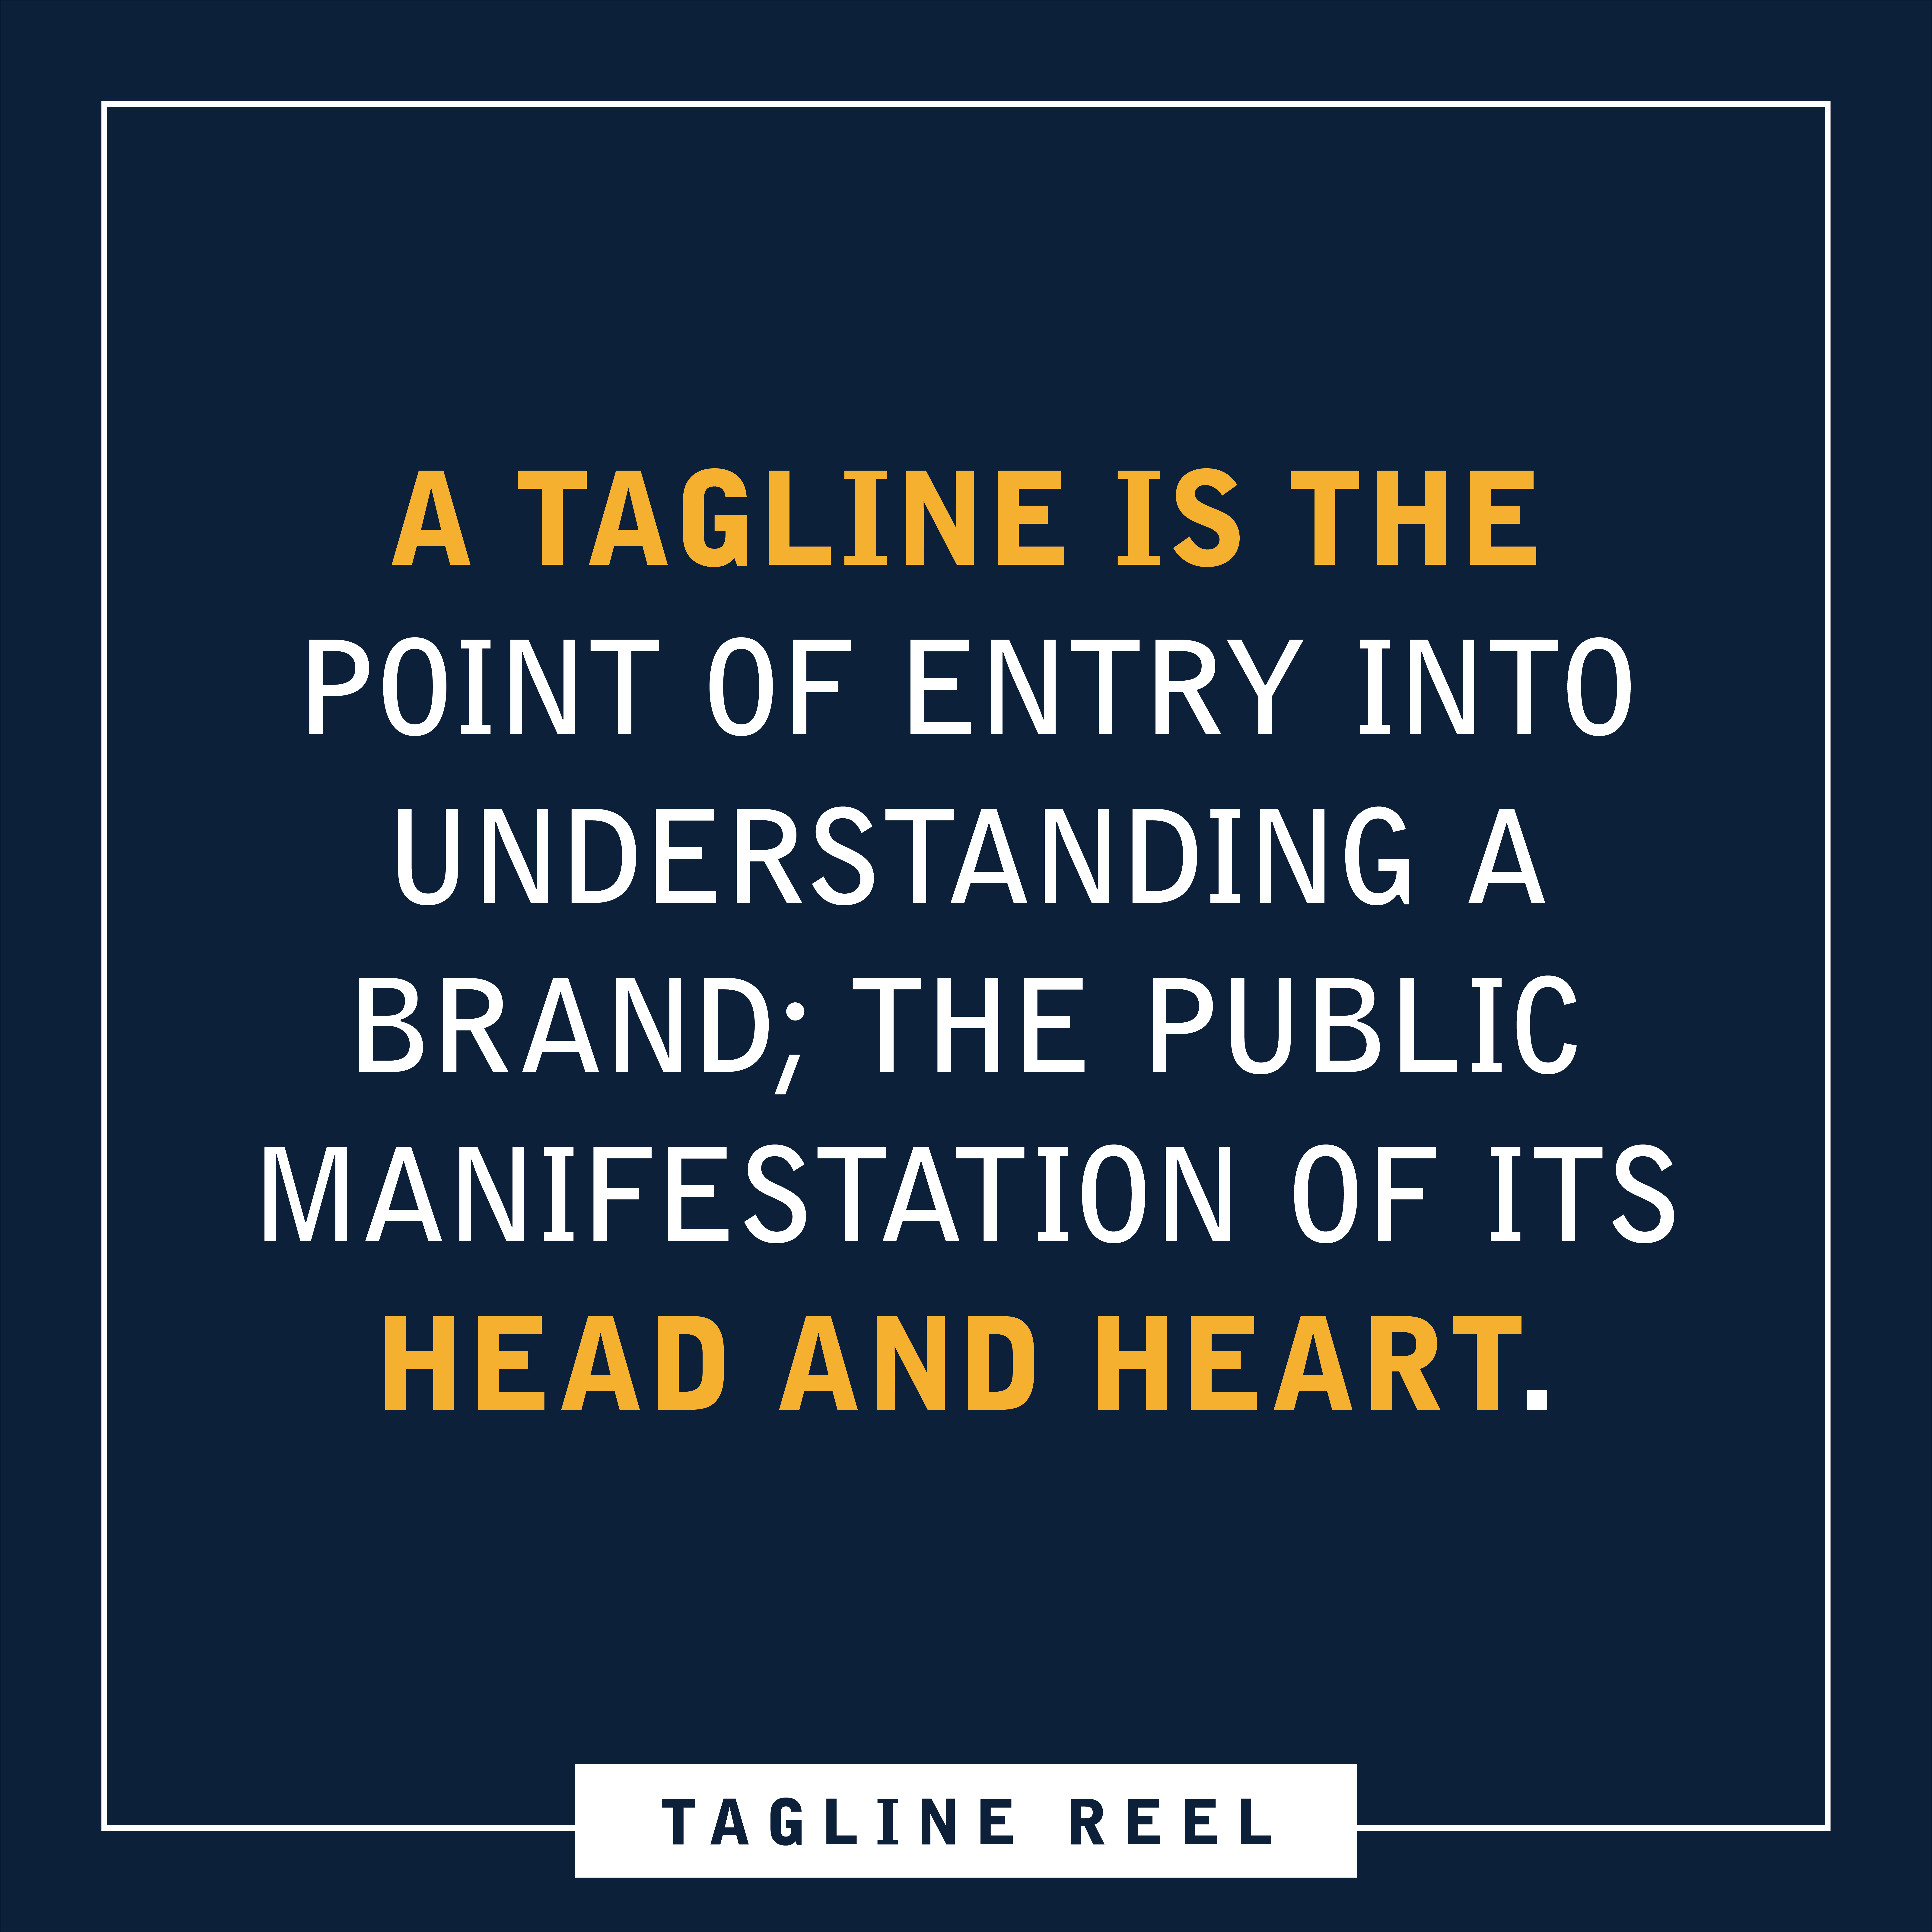 Graphic reads: A tagline is the point of entry into understanding a brand, the public manifestation of its head and heart.